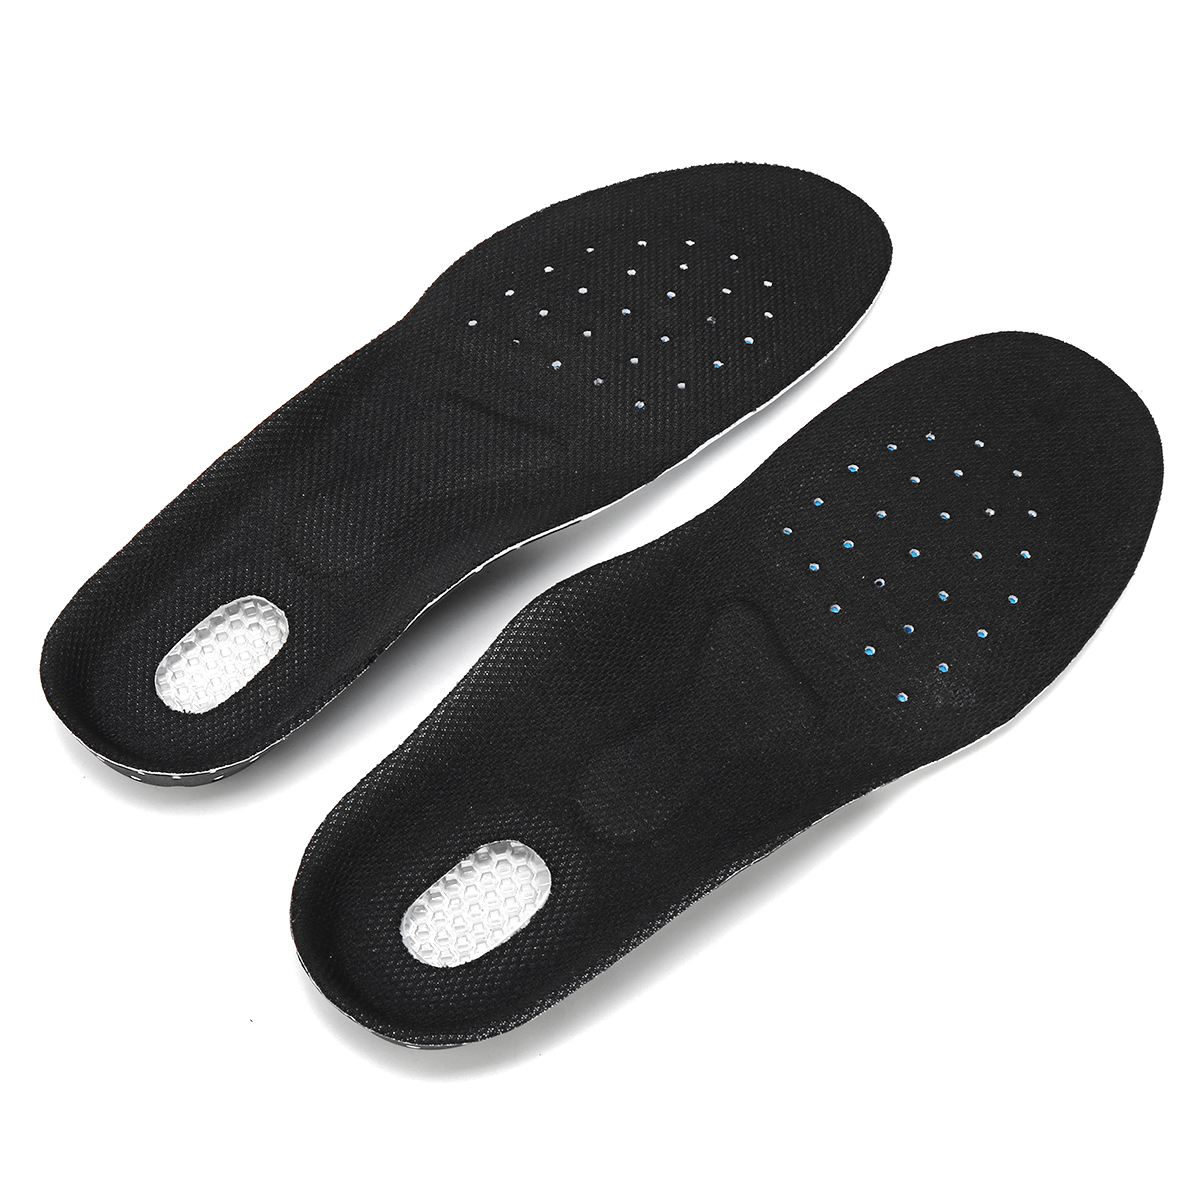 40-46-Size-Men-Women-Fashion-Silica-Gel-Insole-Orthotic-Sport-Running-Shoes-Insoles-Pain-Relief-1426368